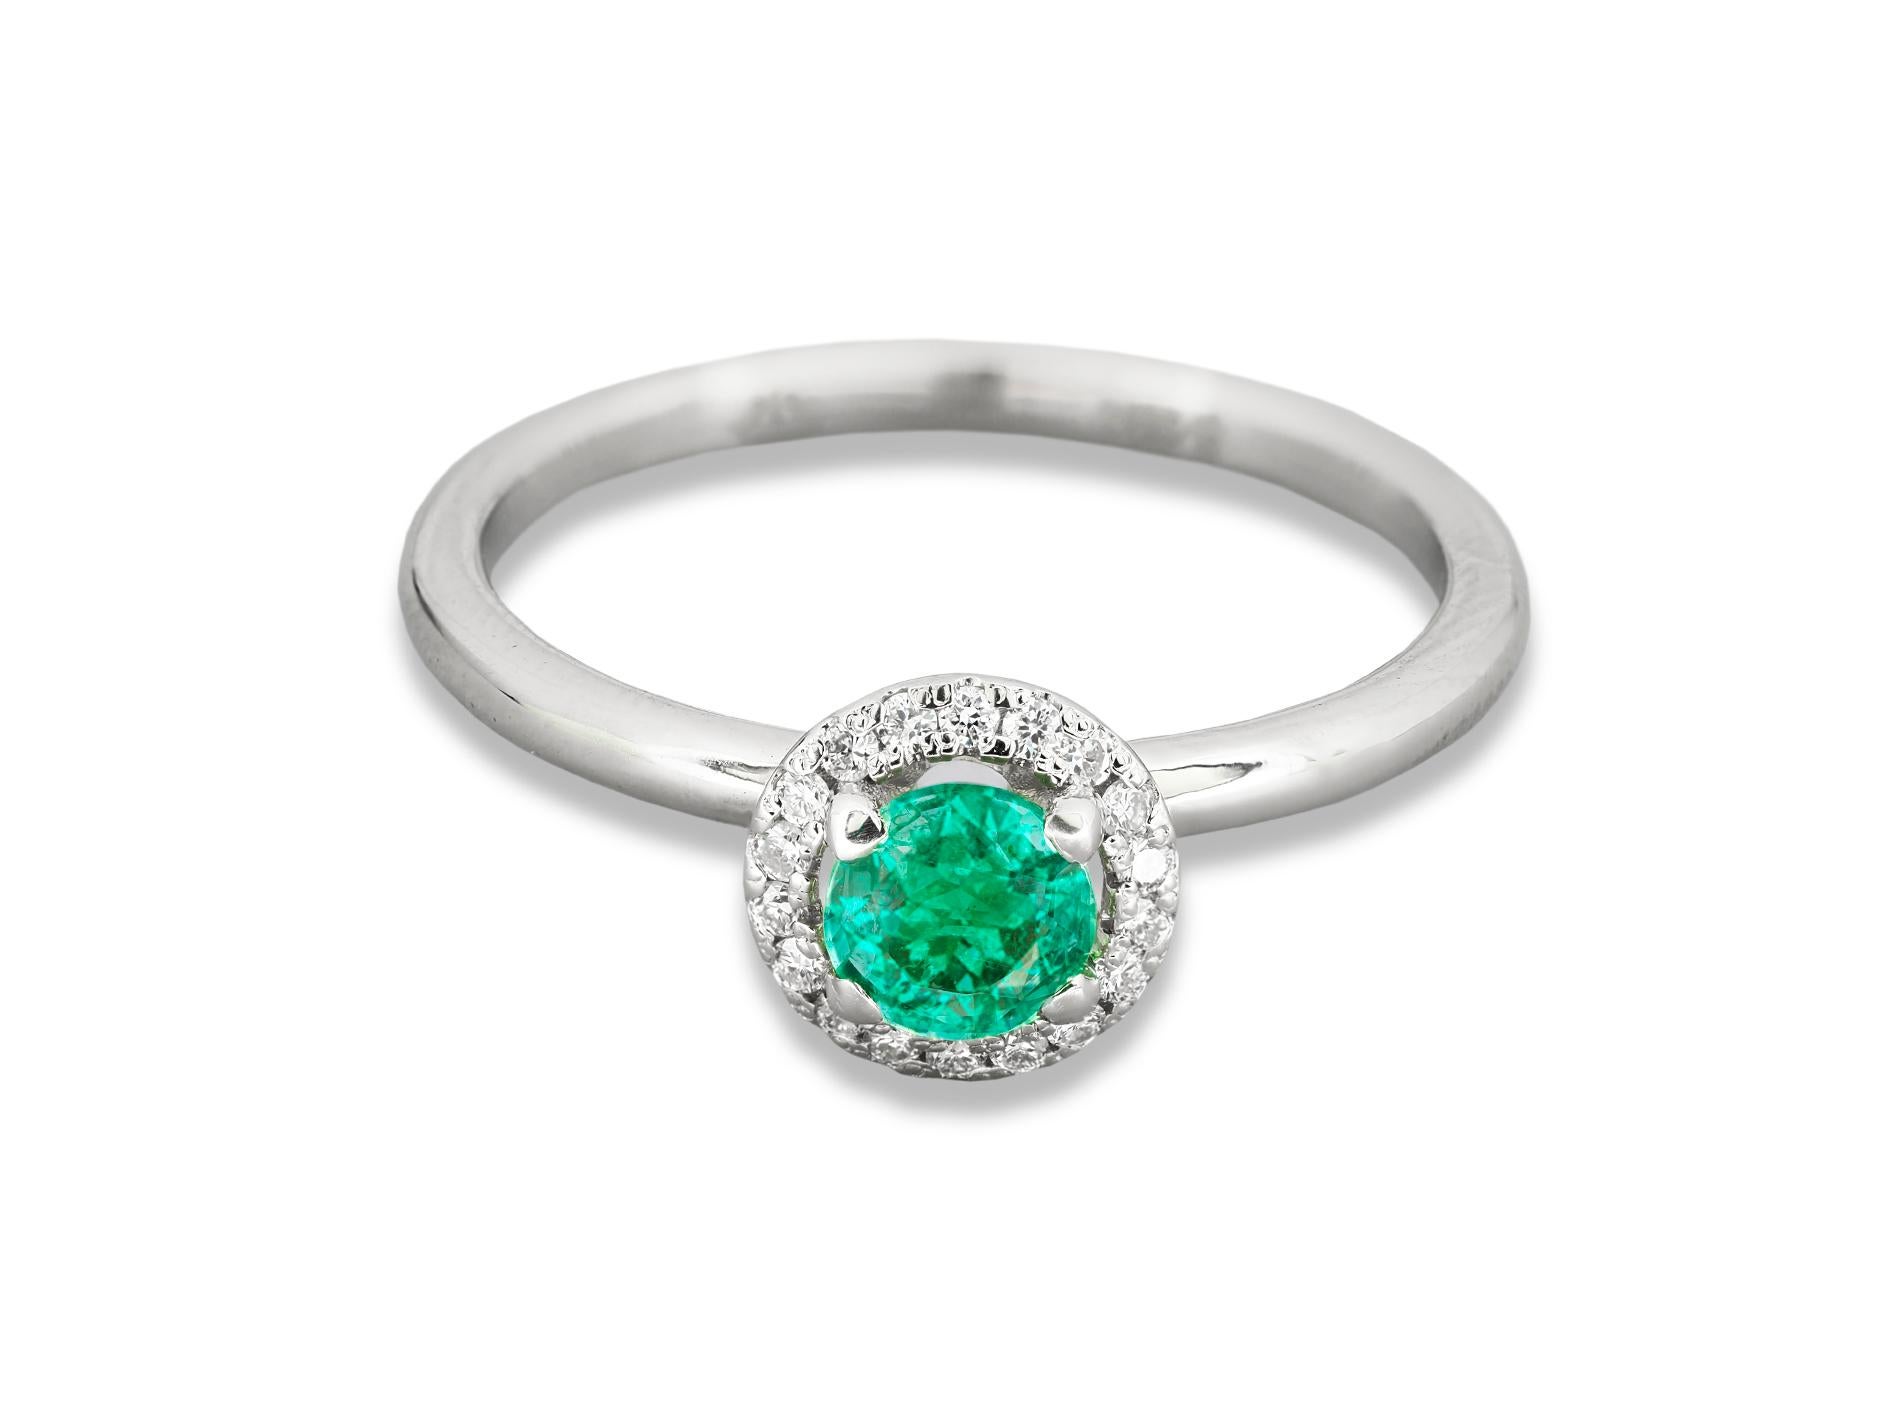 14k Gold Ring with Emerald and Diamonds, Emerald Halo Ring 5